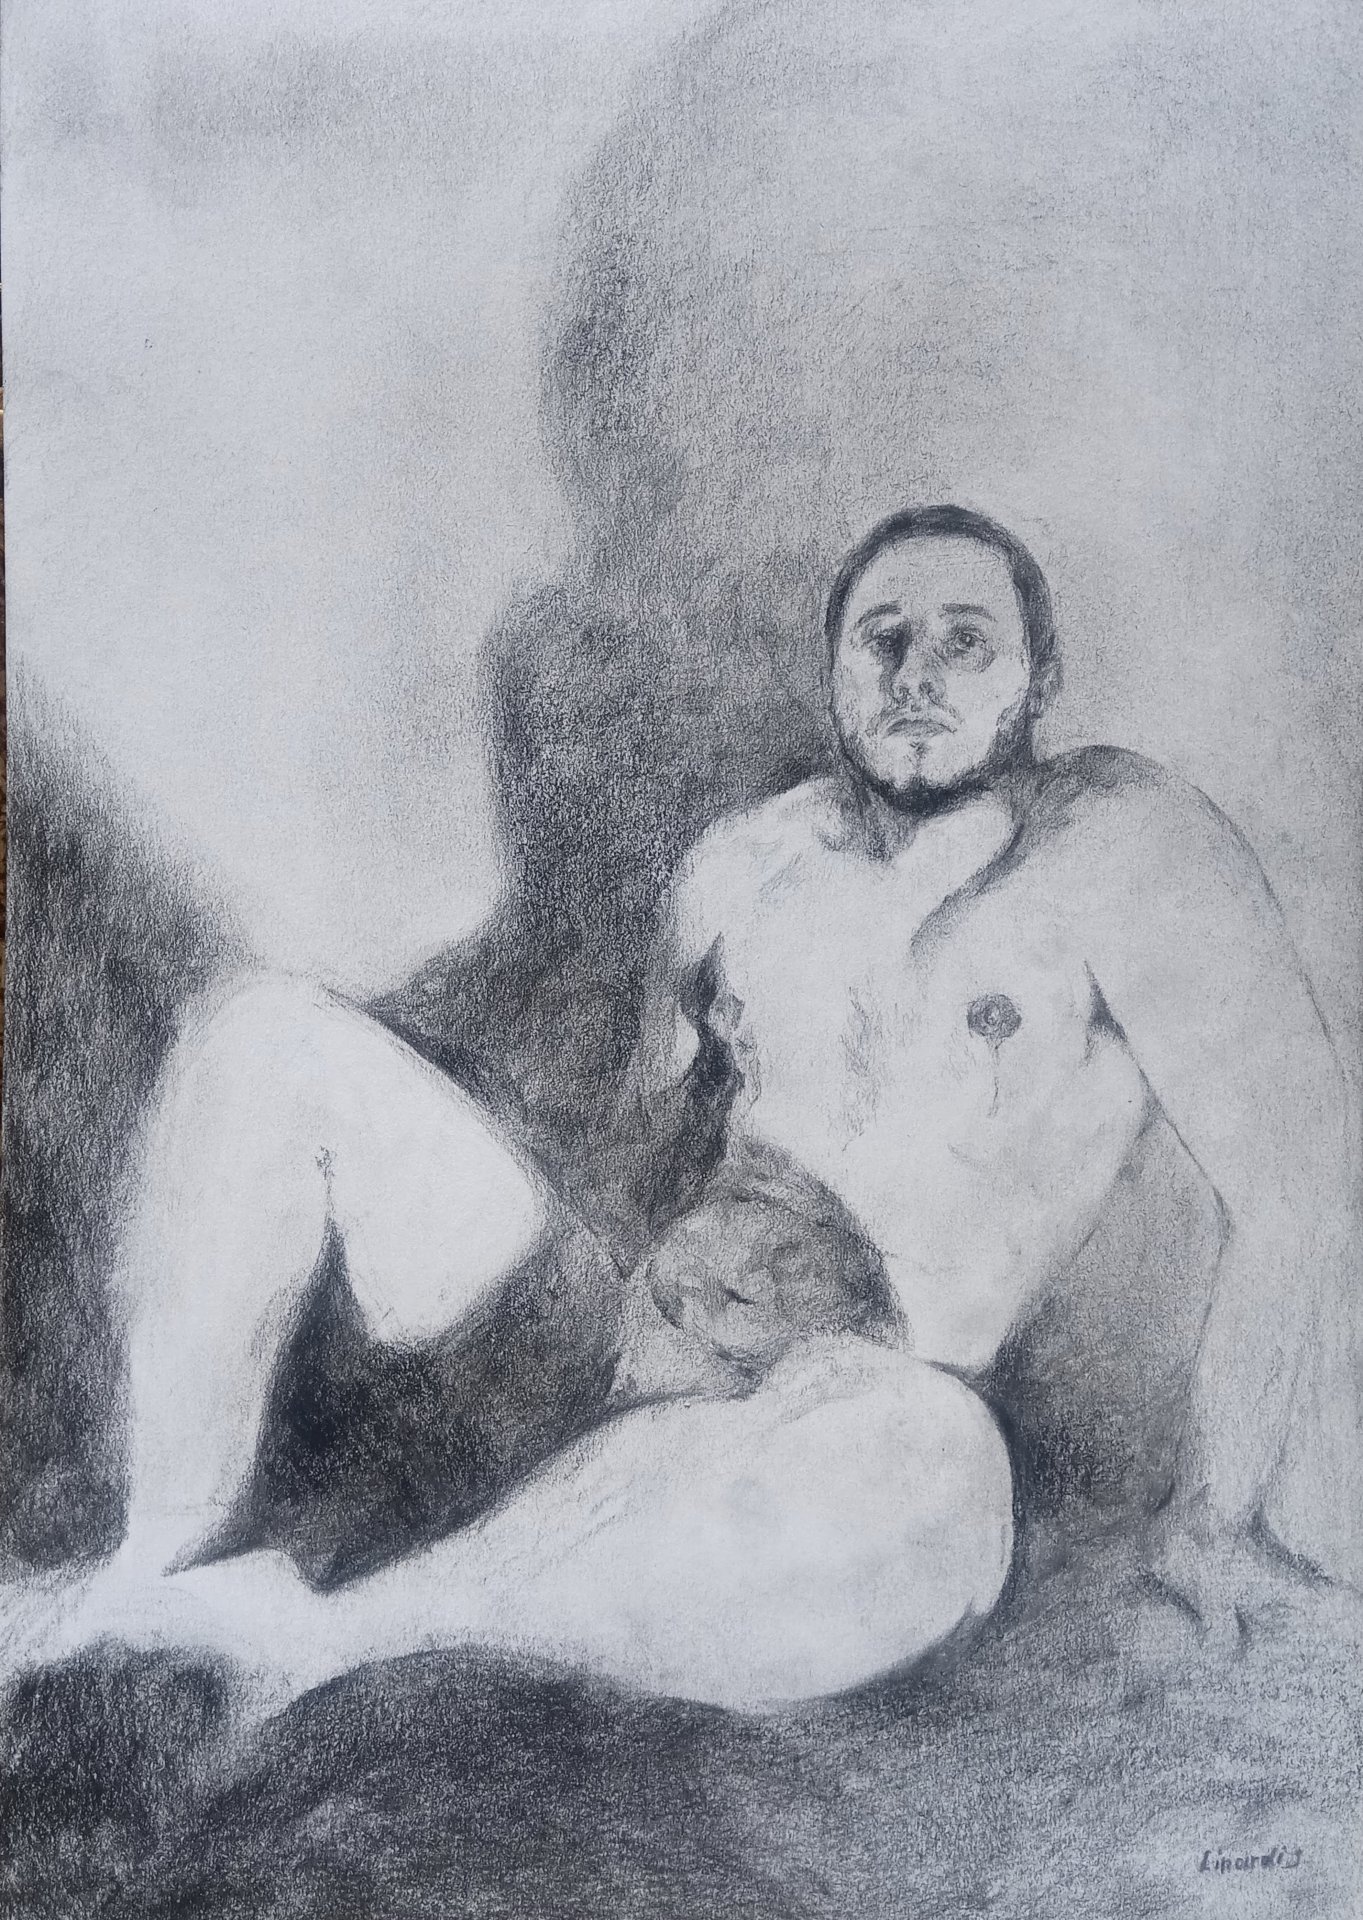 a black and white self portrait painting depicting Nathanail Evan Linardis in the nude looking at the viewer